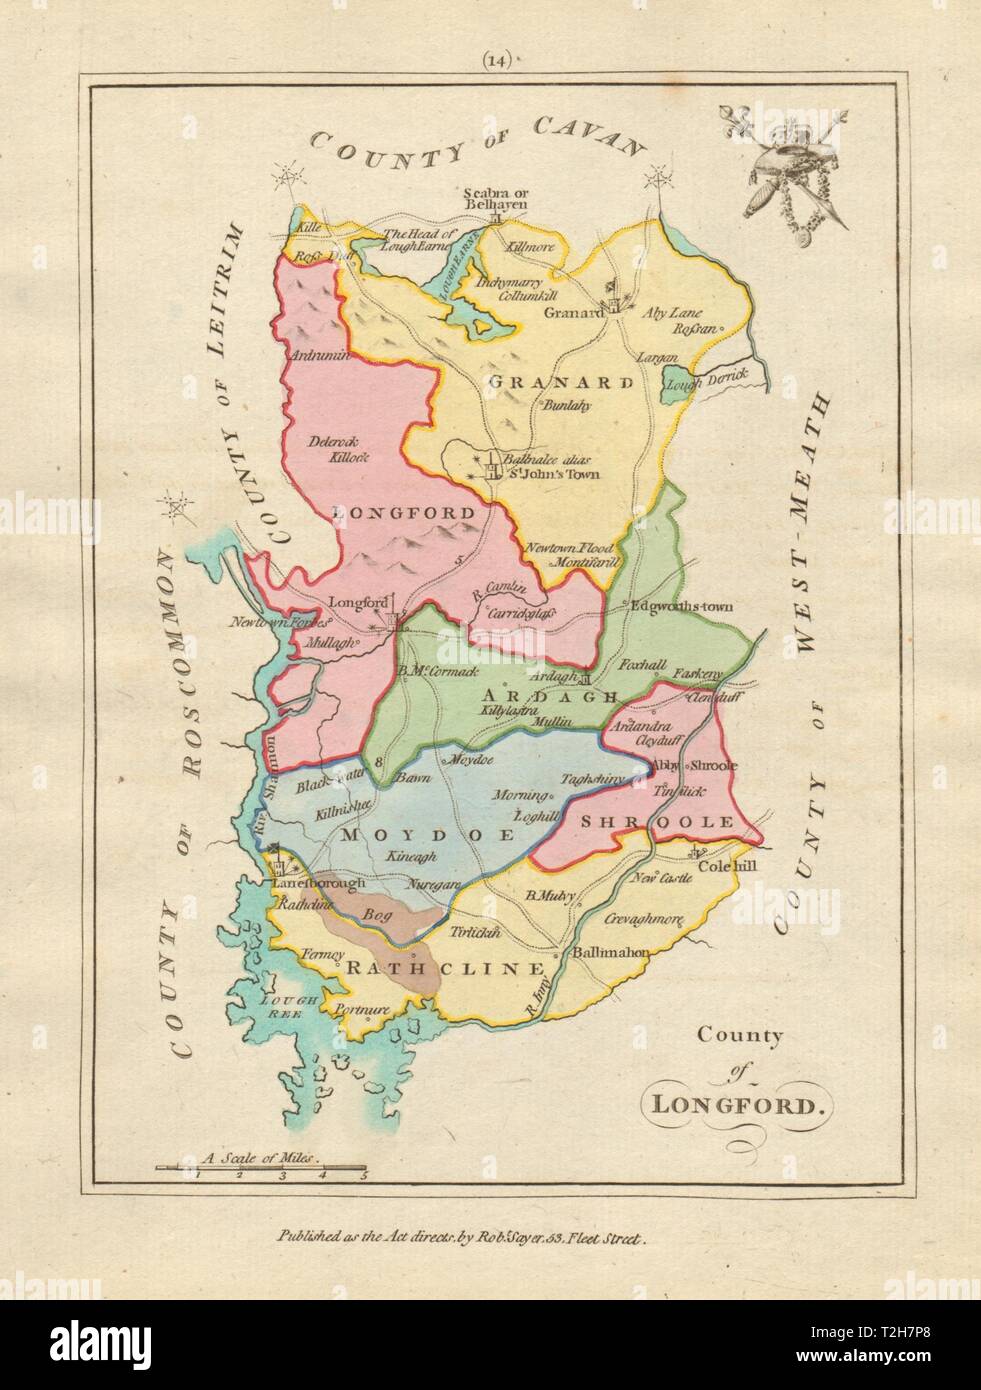 County of Longford, Leinster. Antique copperplate map by Scalé / Sayer 1788 Stock Photo